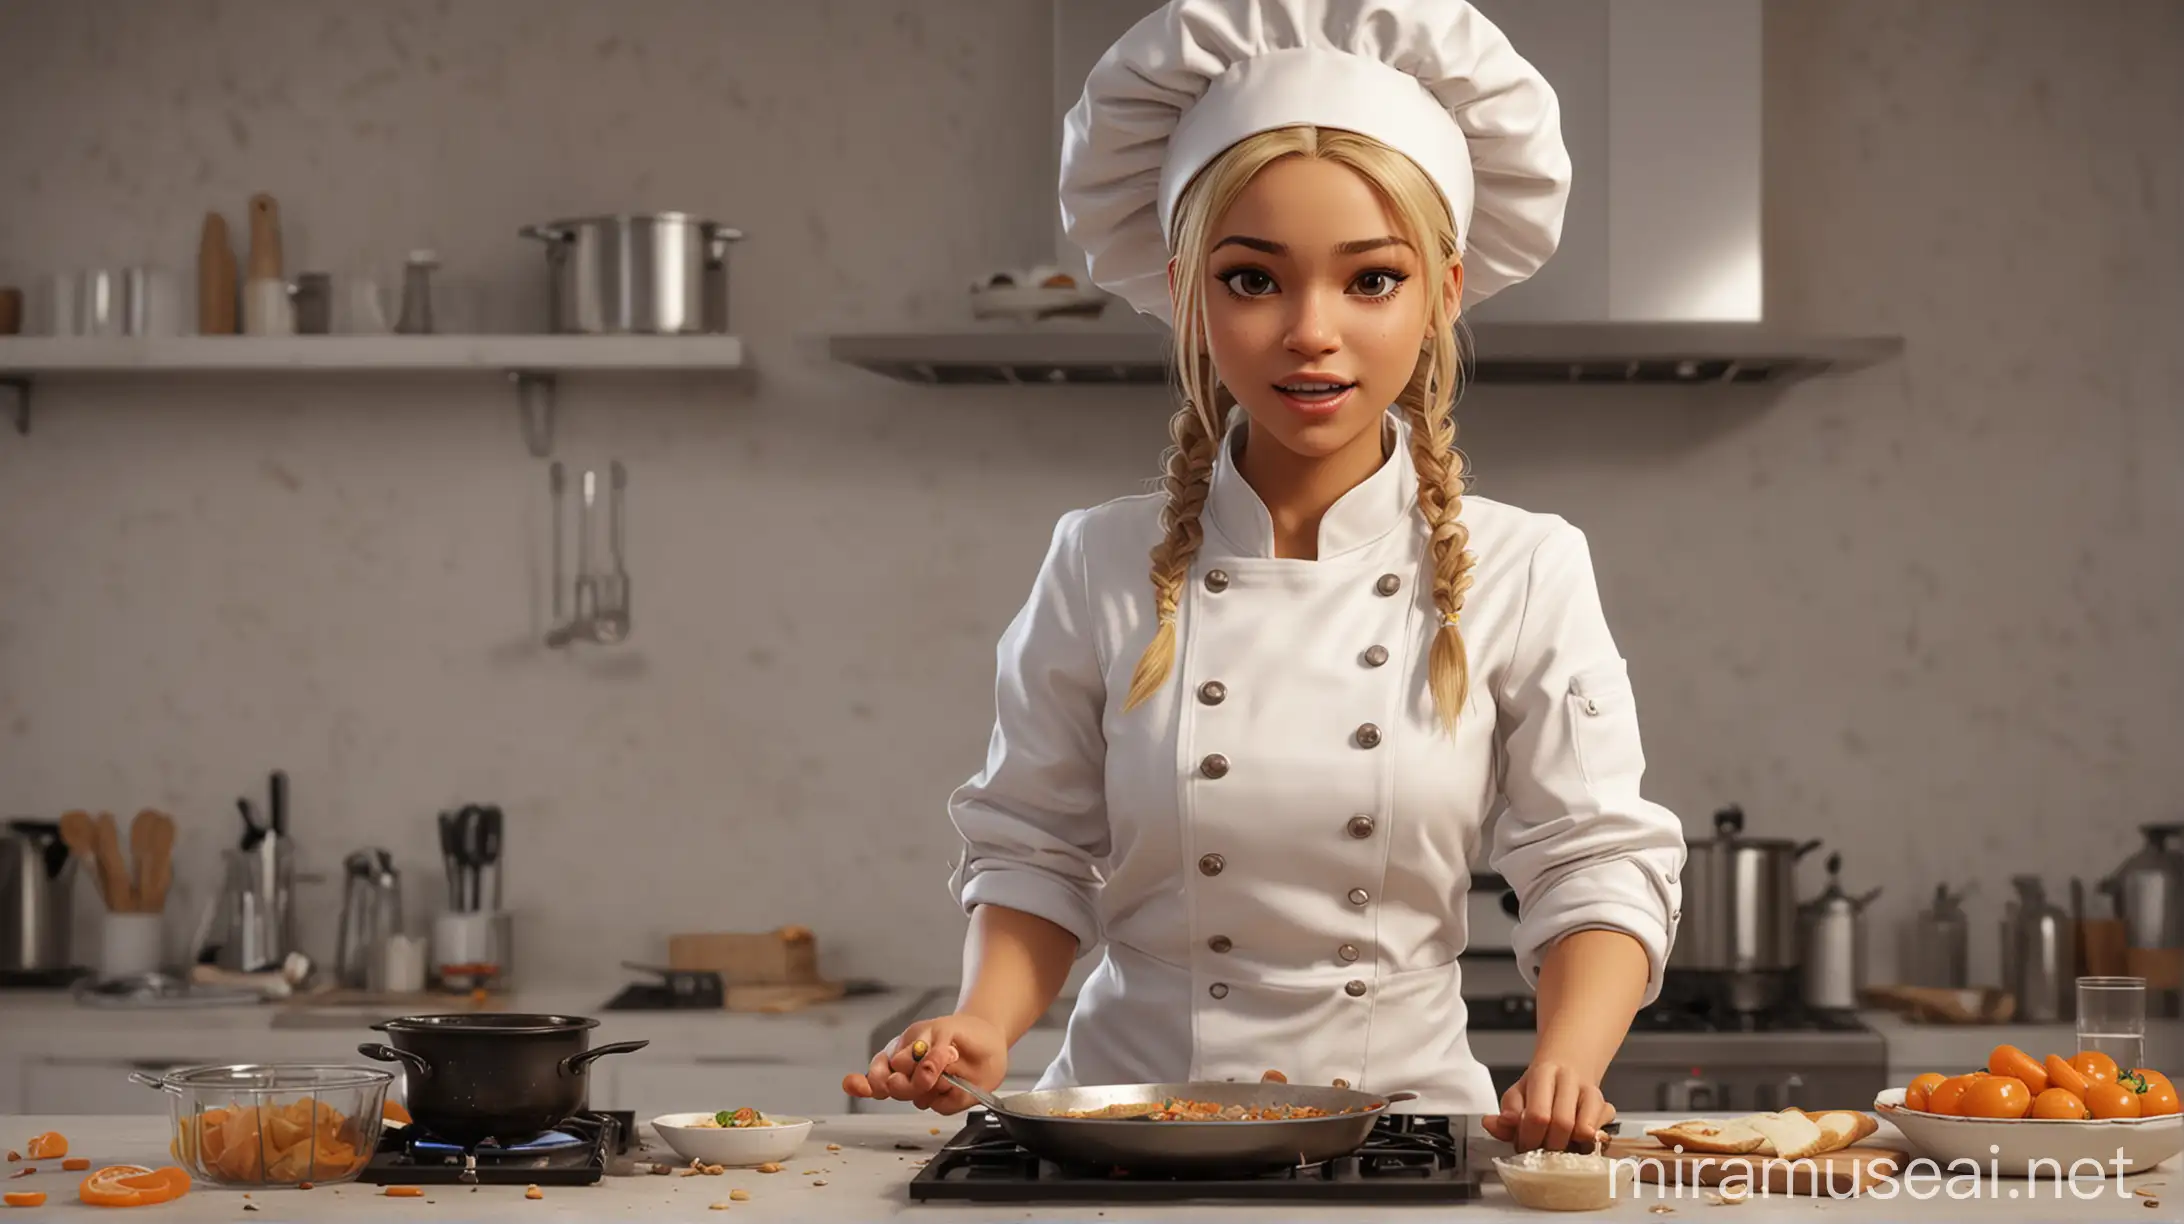 Light Skin Video Game Girl in Chef Clothes Battling Nausea from Cooking Mishap